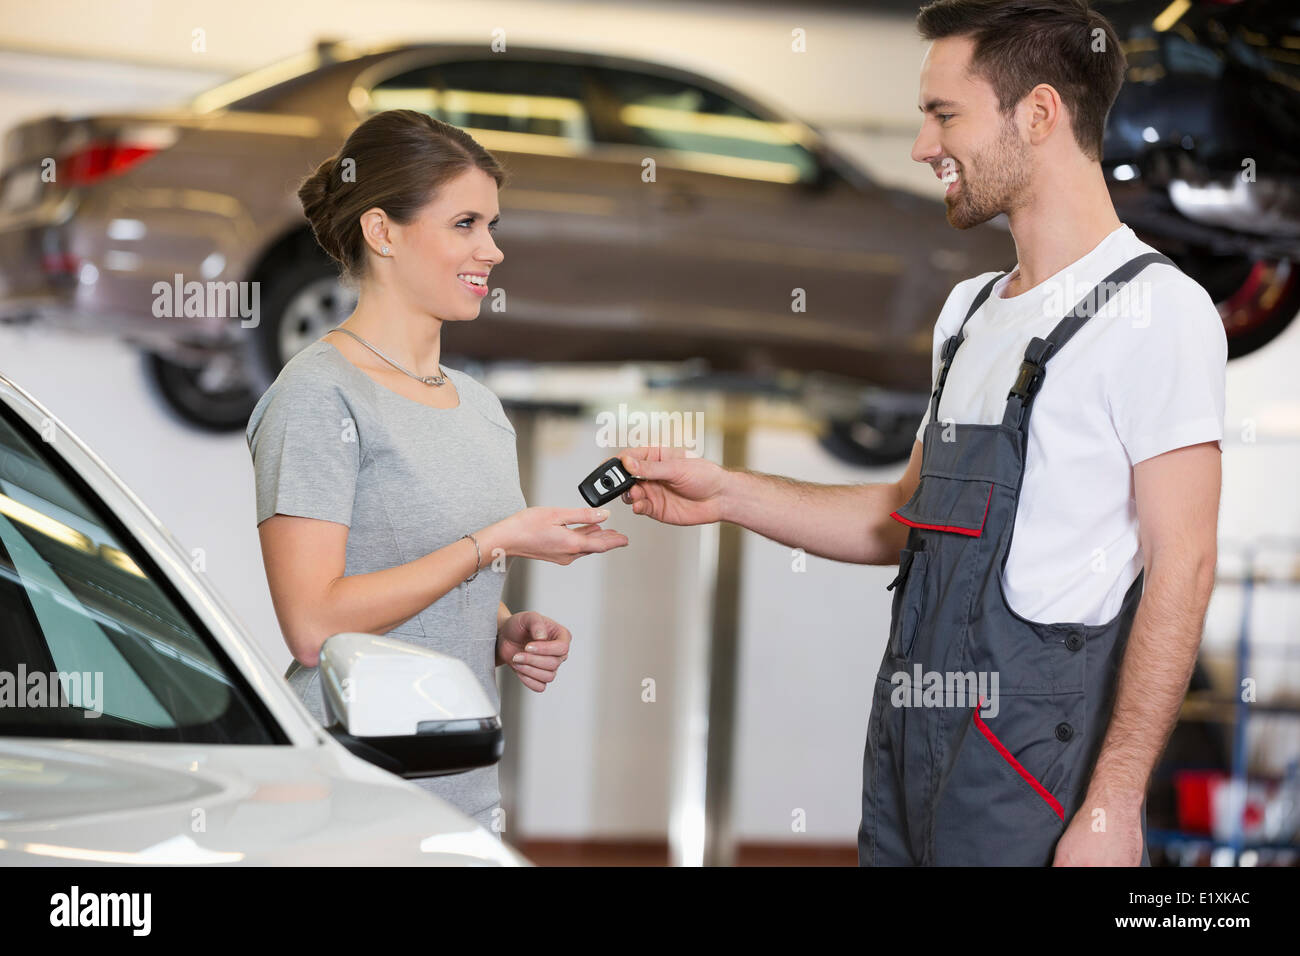 Happy repairman giving car key to woman in workshop Stock Photo